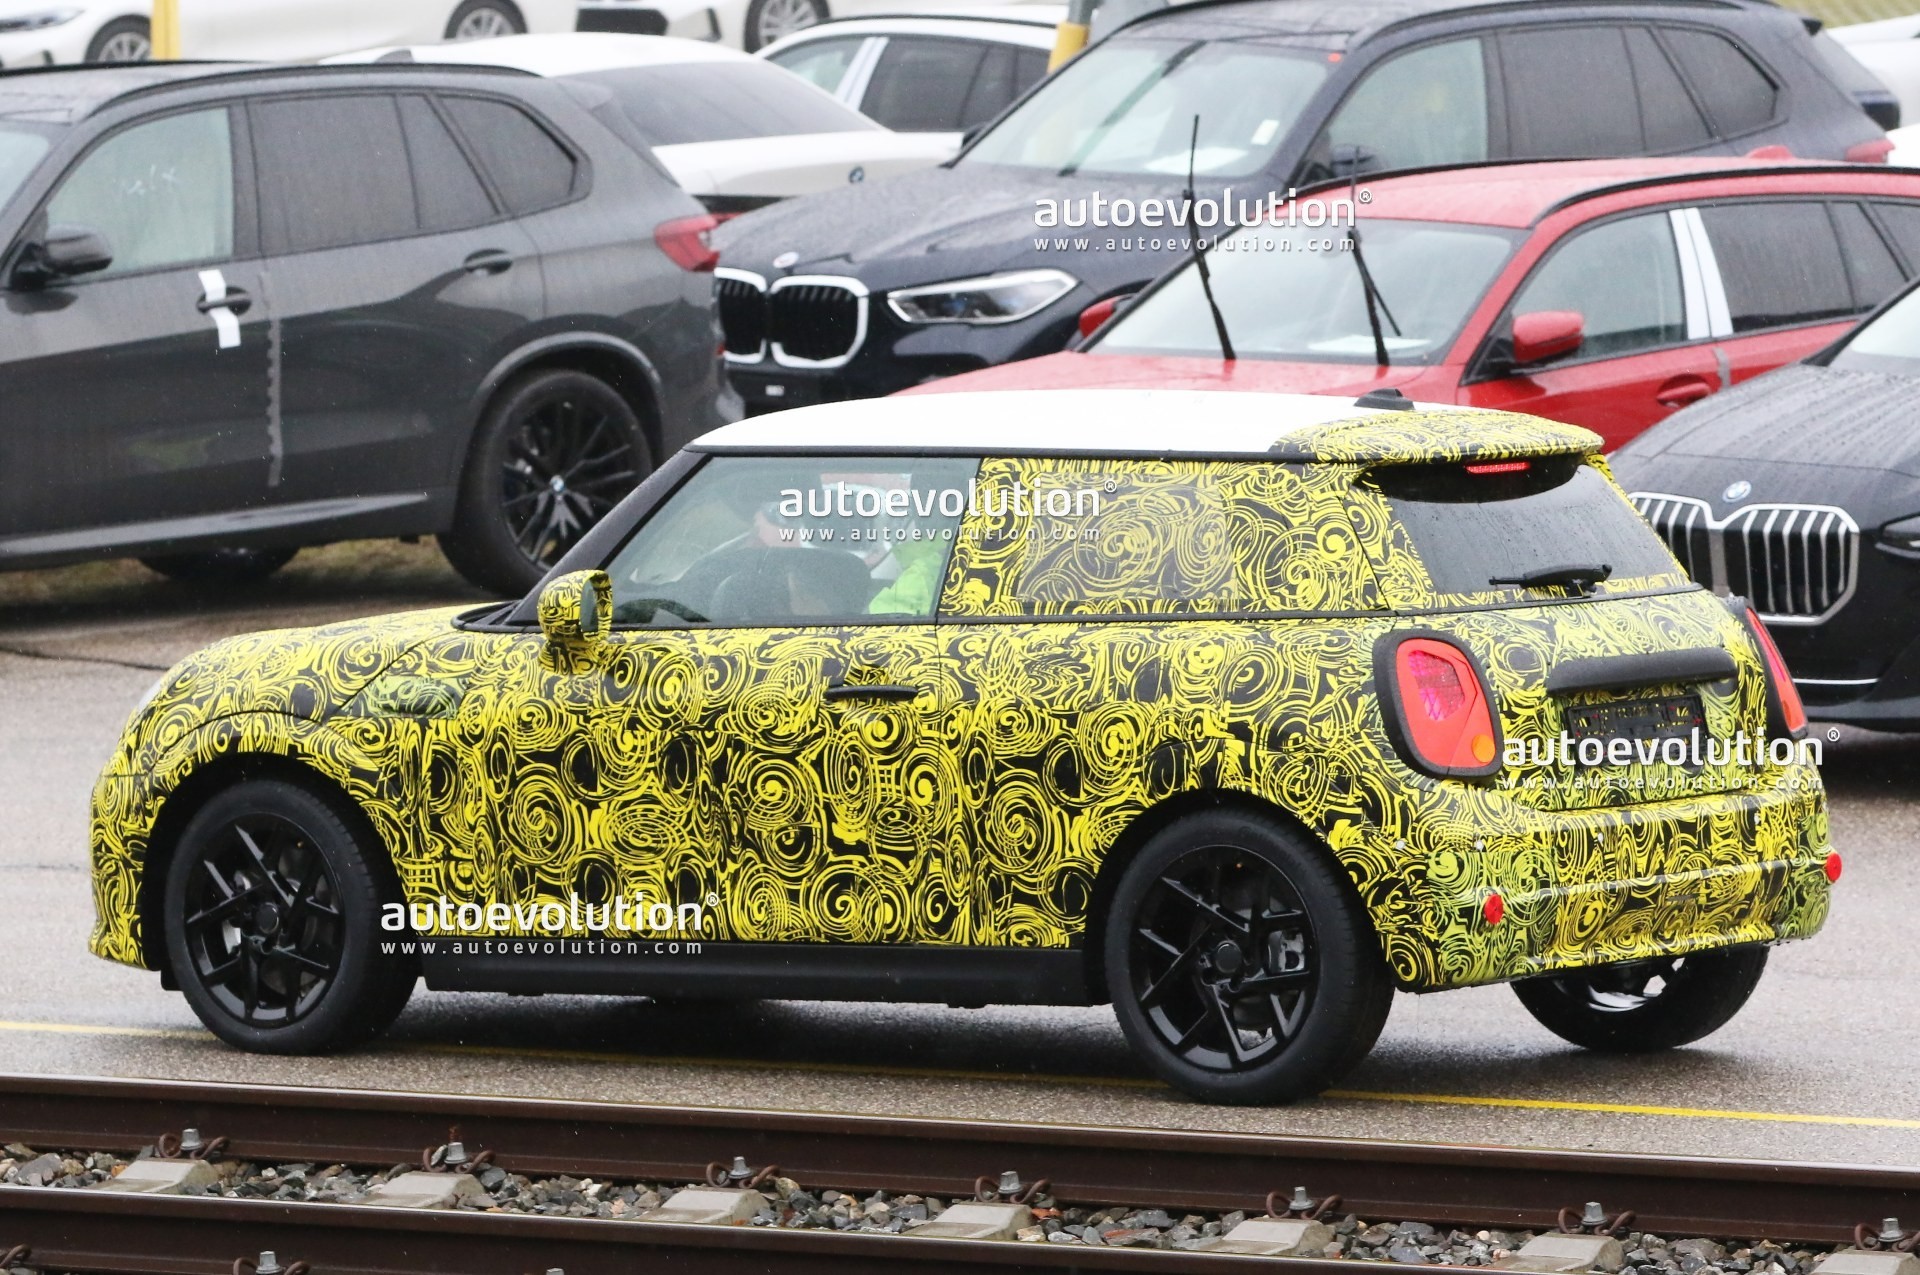 Next-gen Mini convertible spotted with internal combustion engine